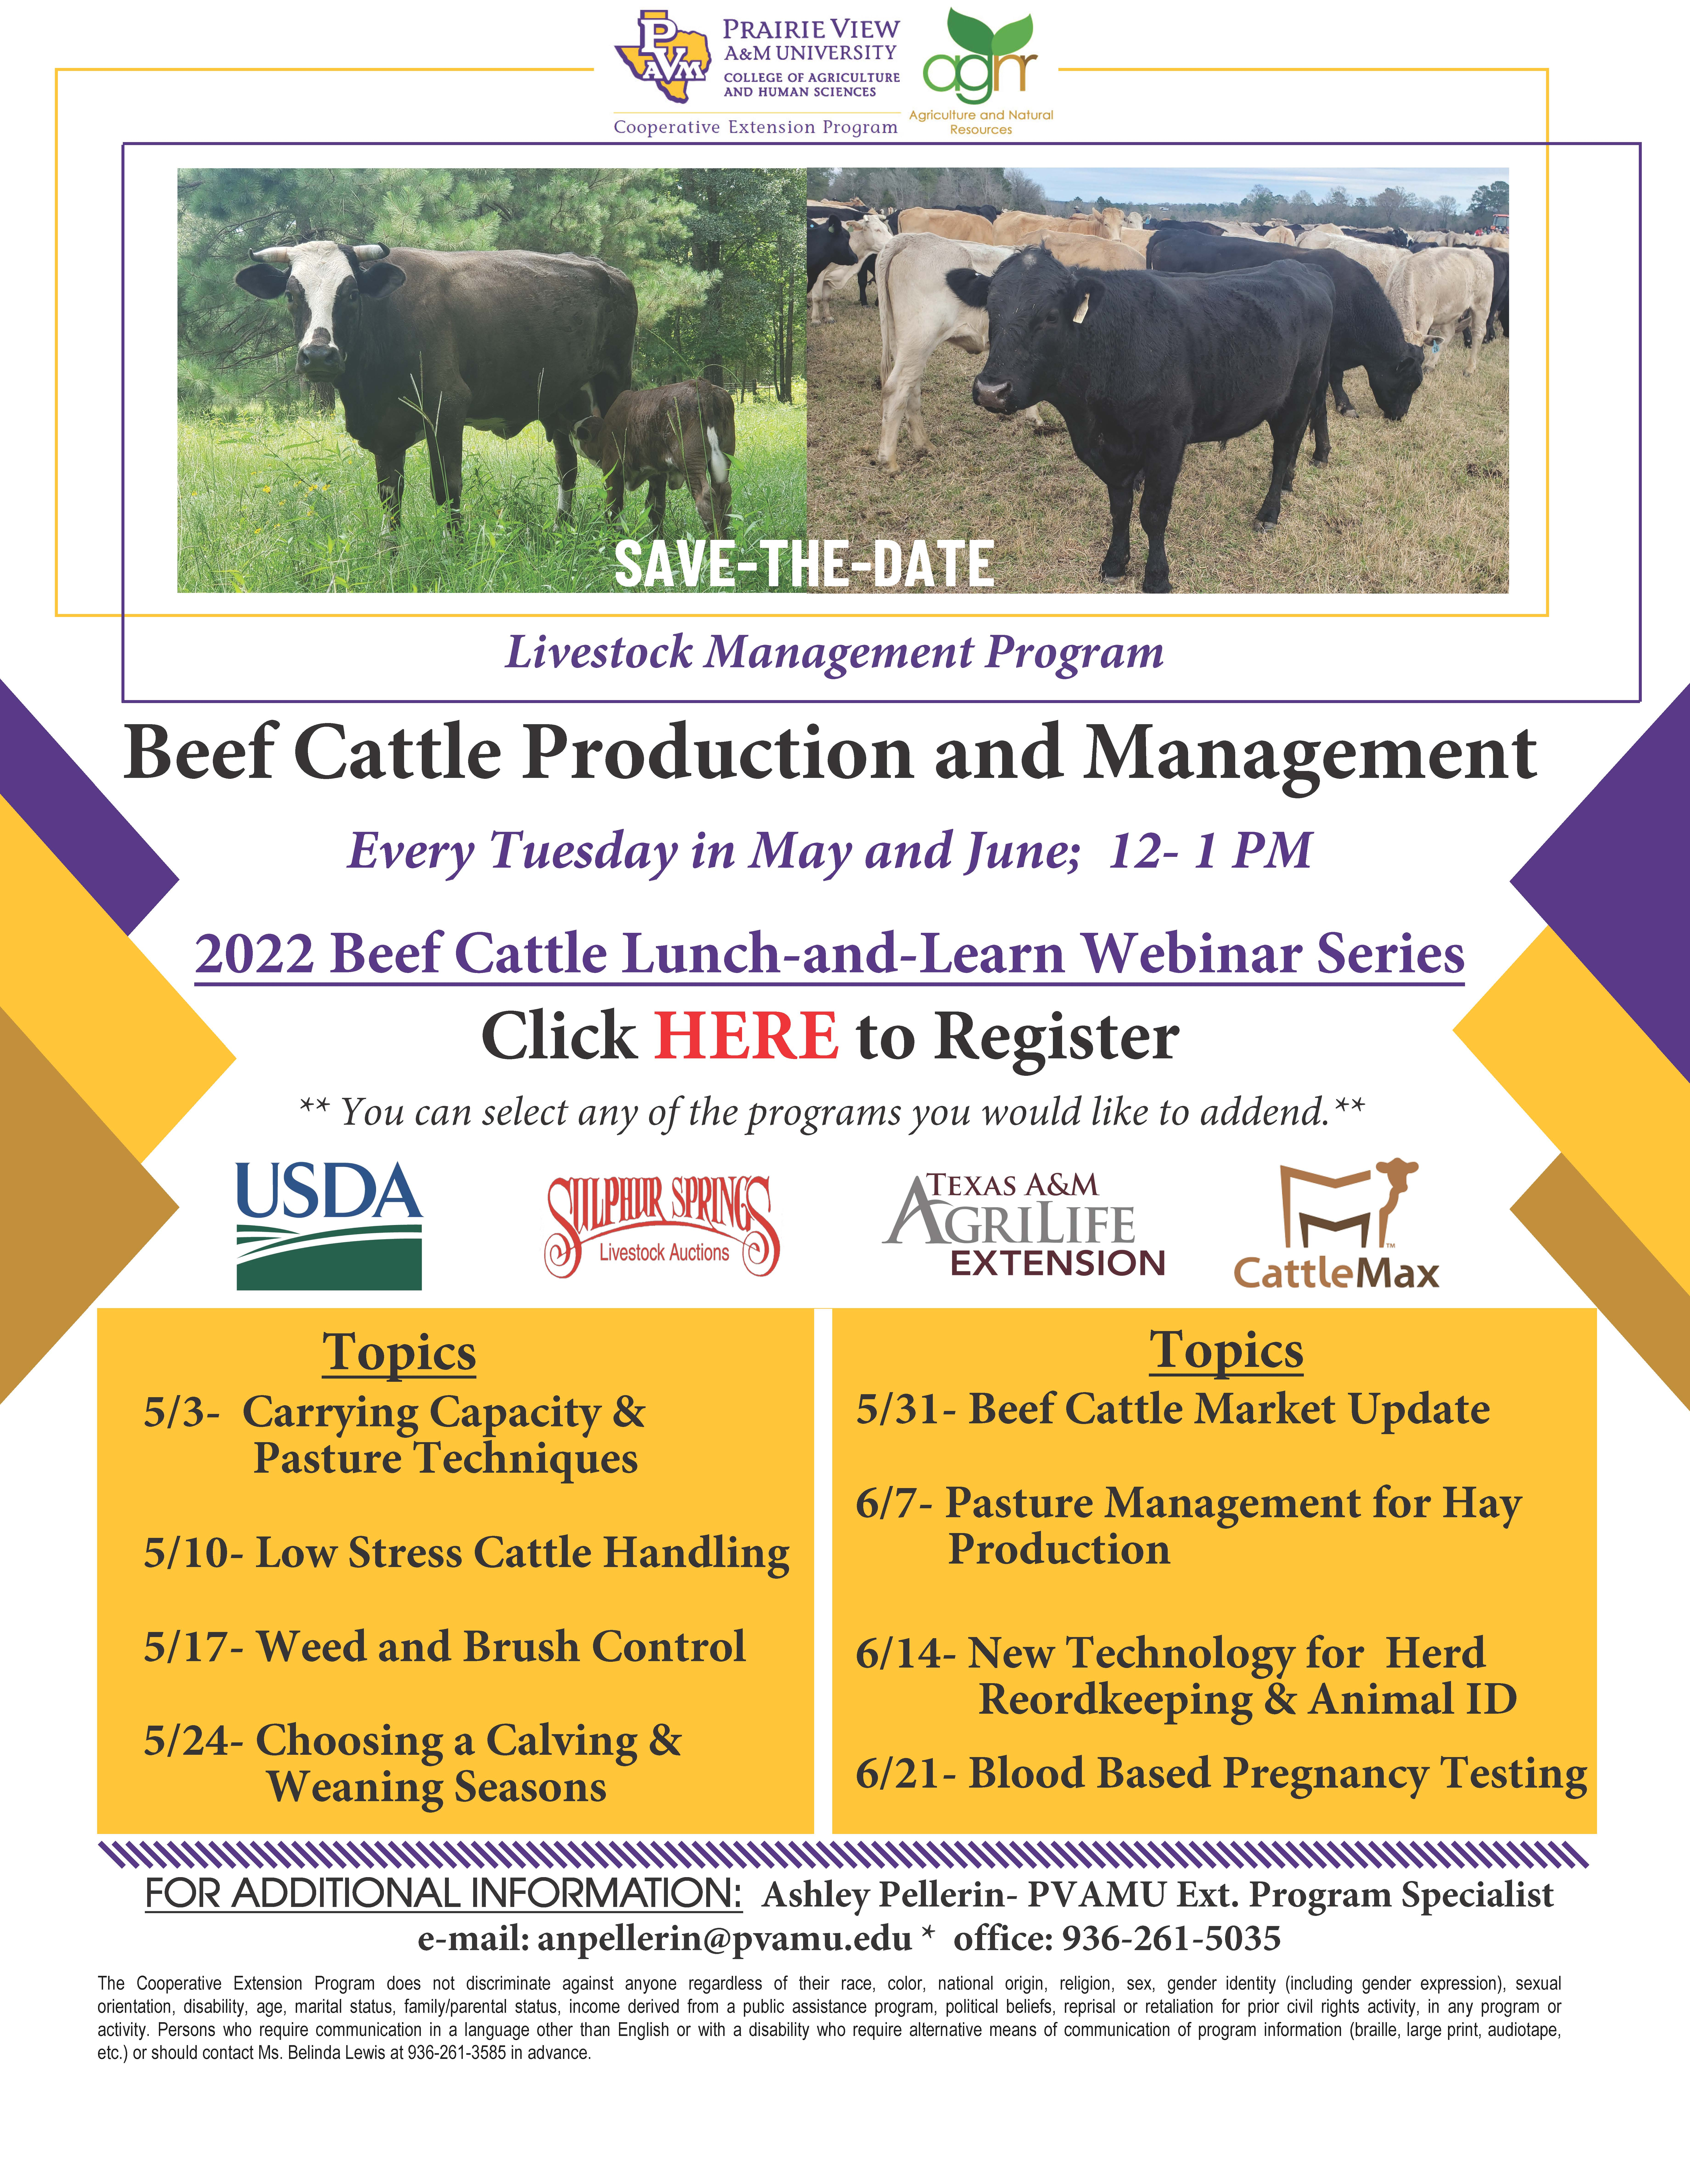 Beef Cattle Web Series Flyer 2022- Save the Date